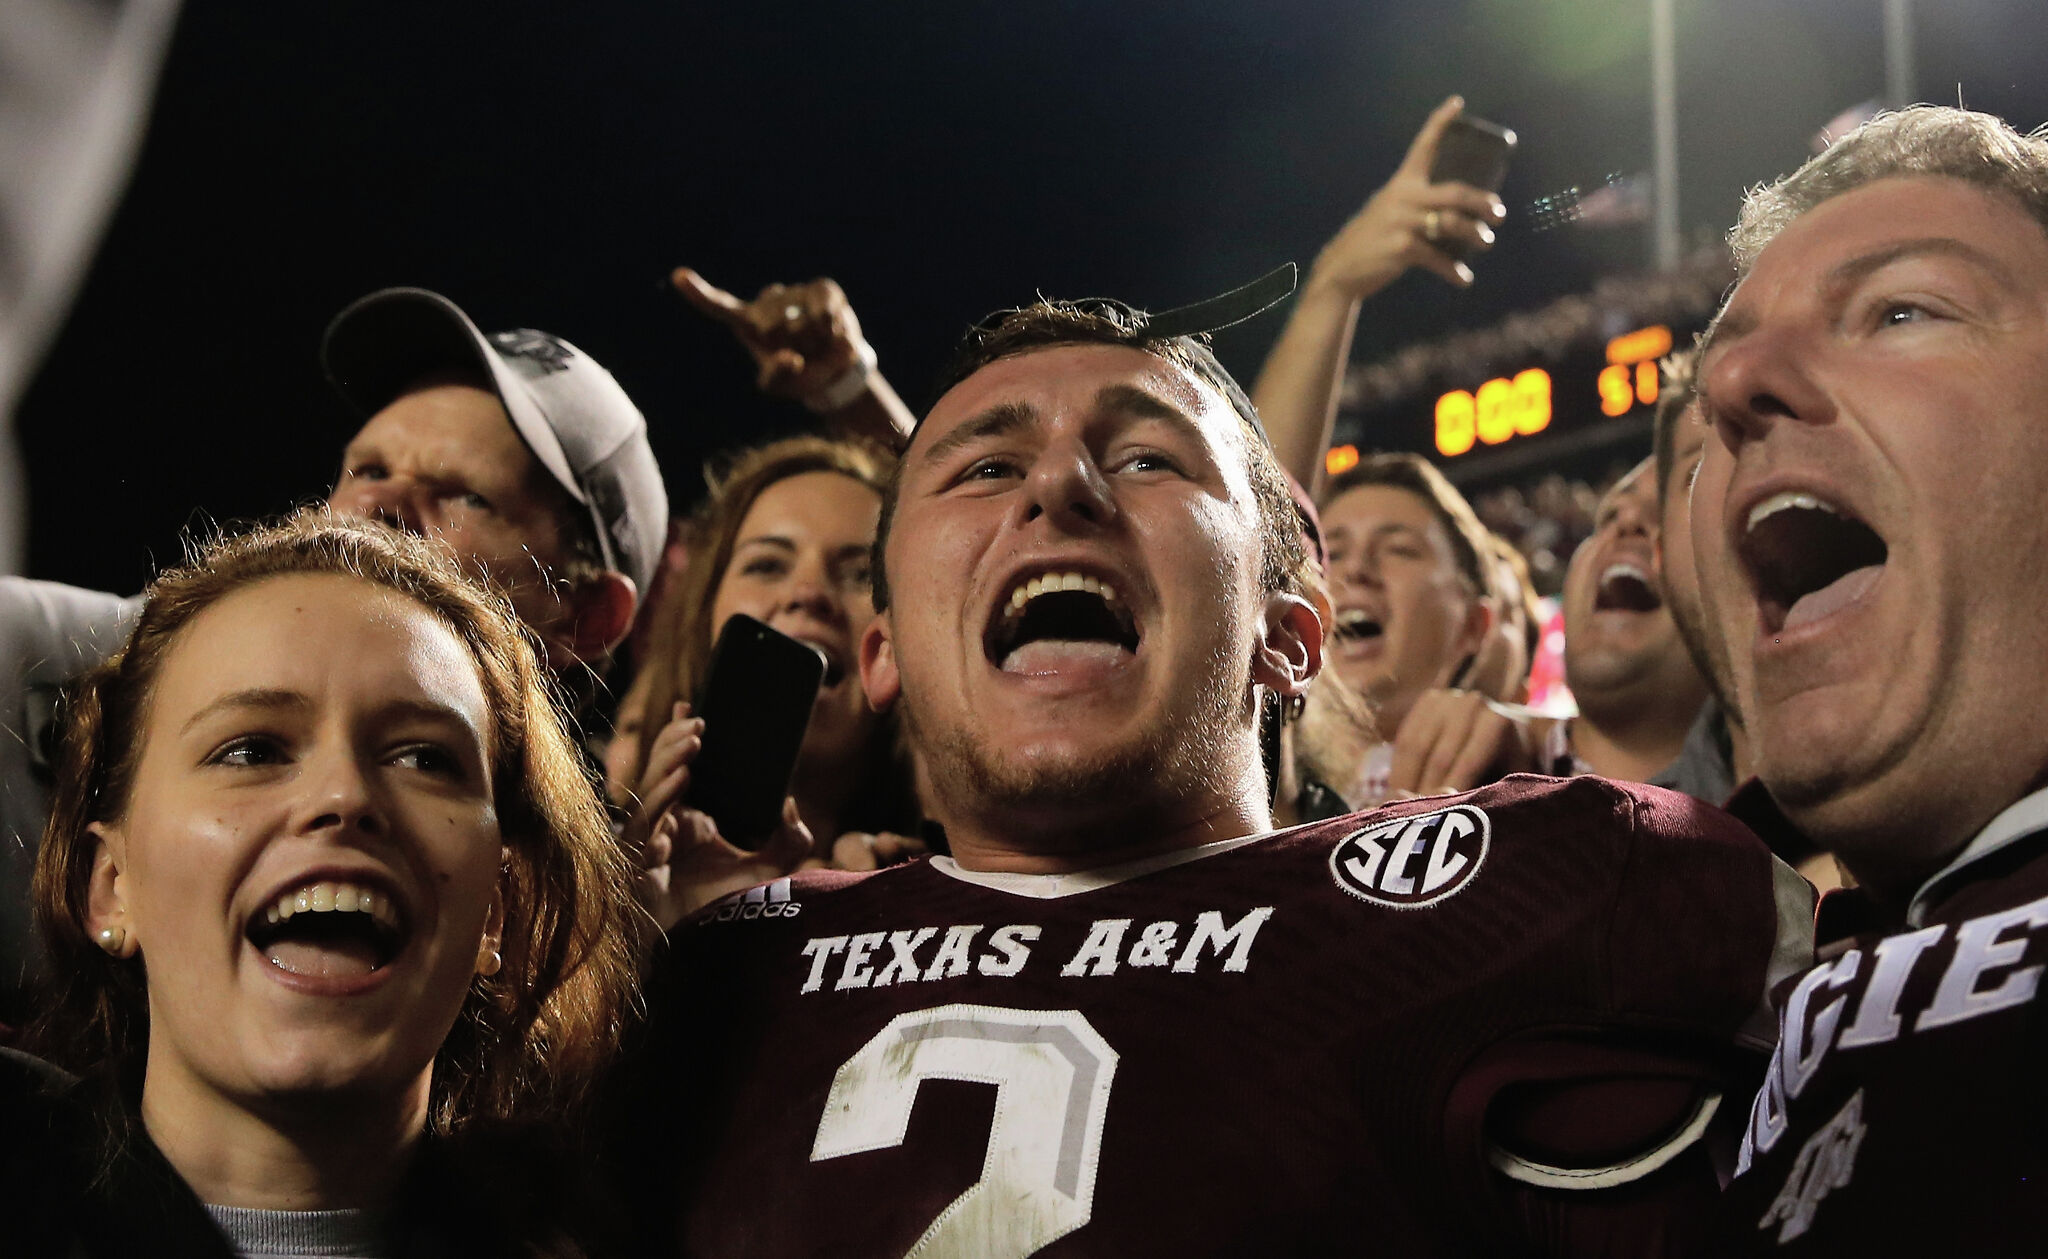 Manziel has wild life on and off field